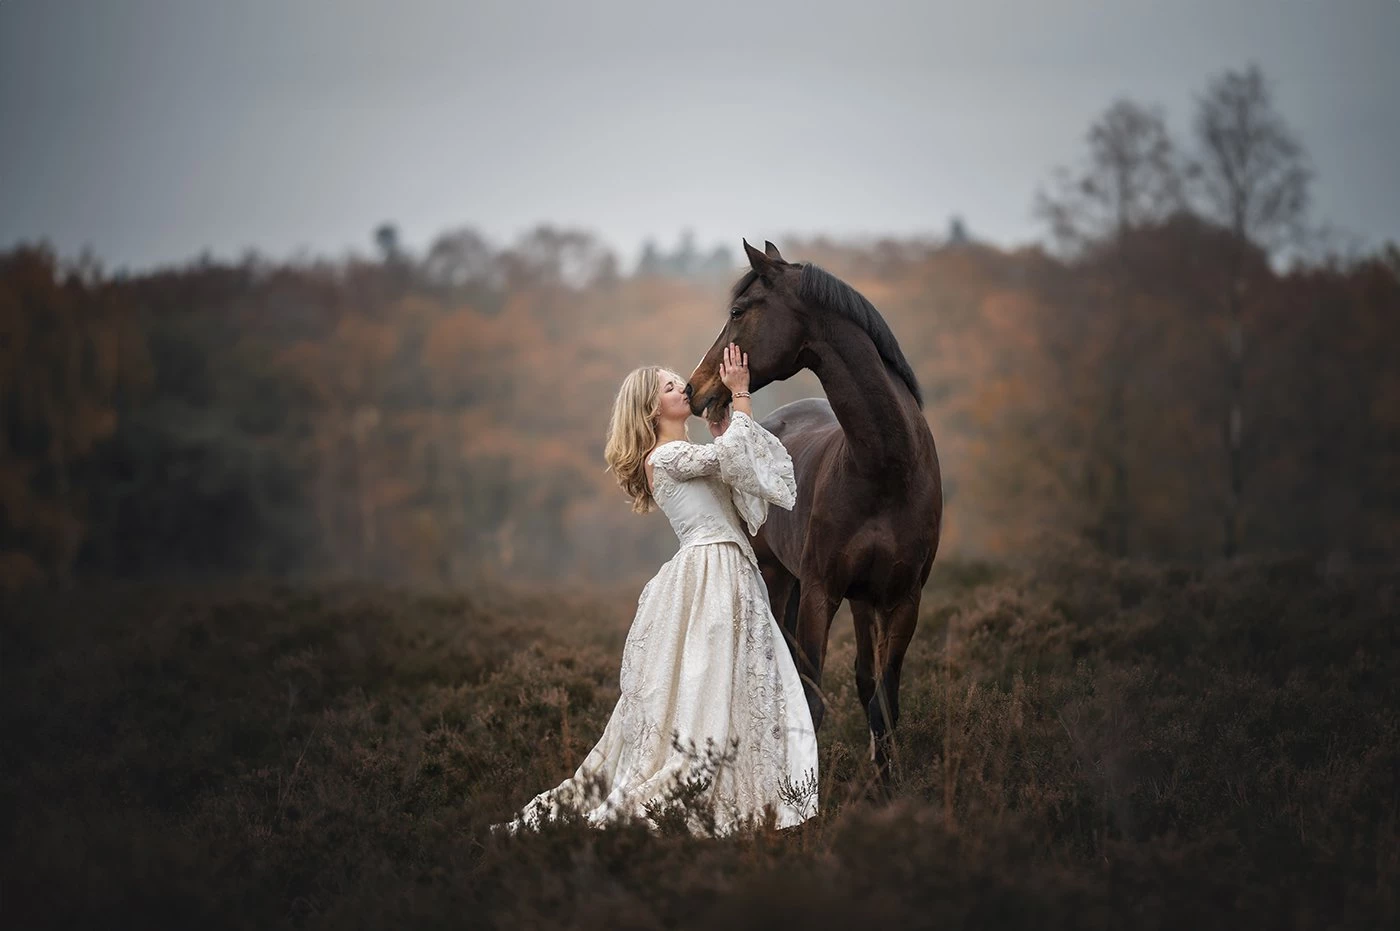 During a dark and cloudy day I took this picture of this beautiful woman and her horse.